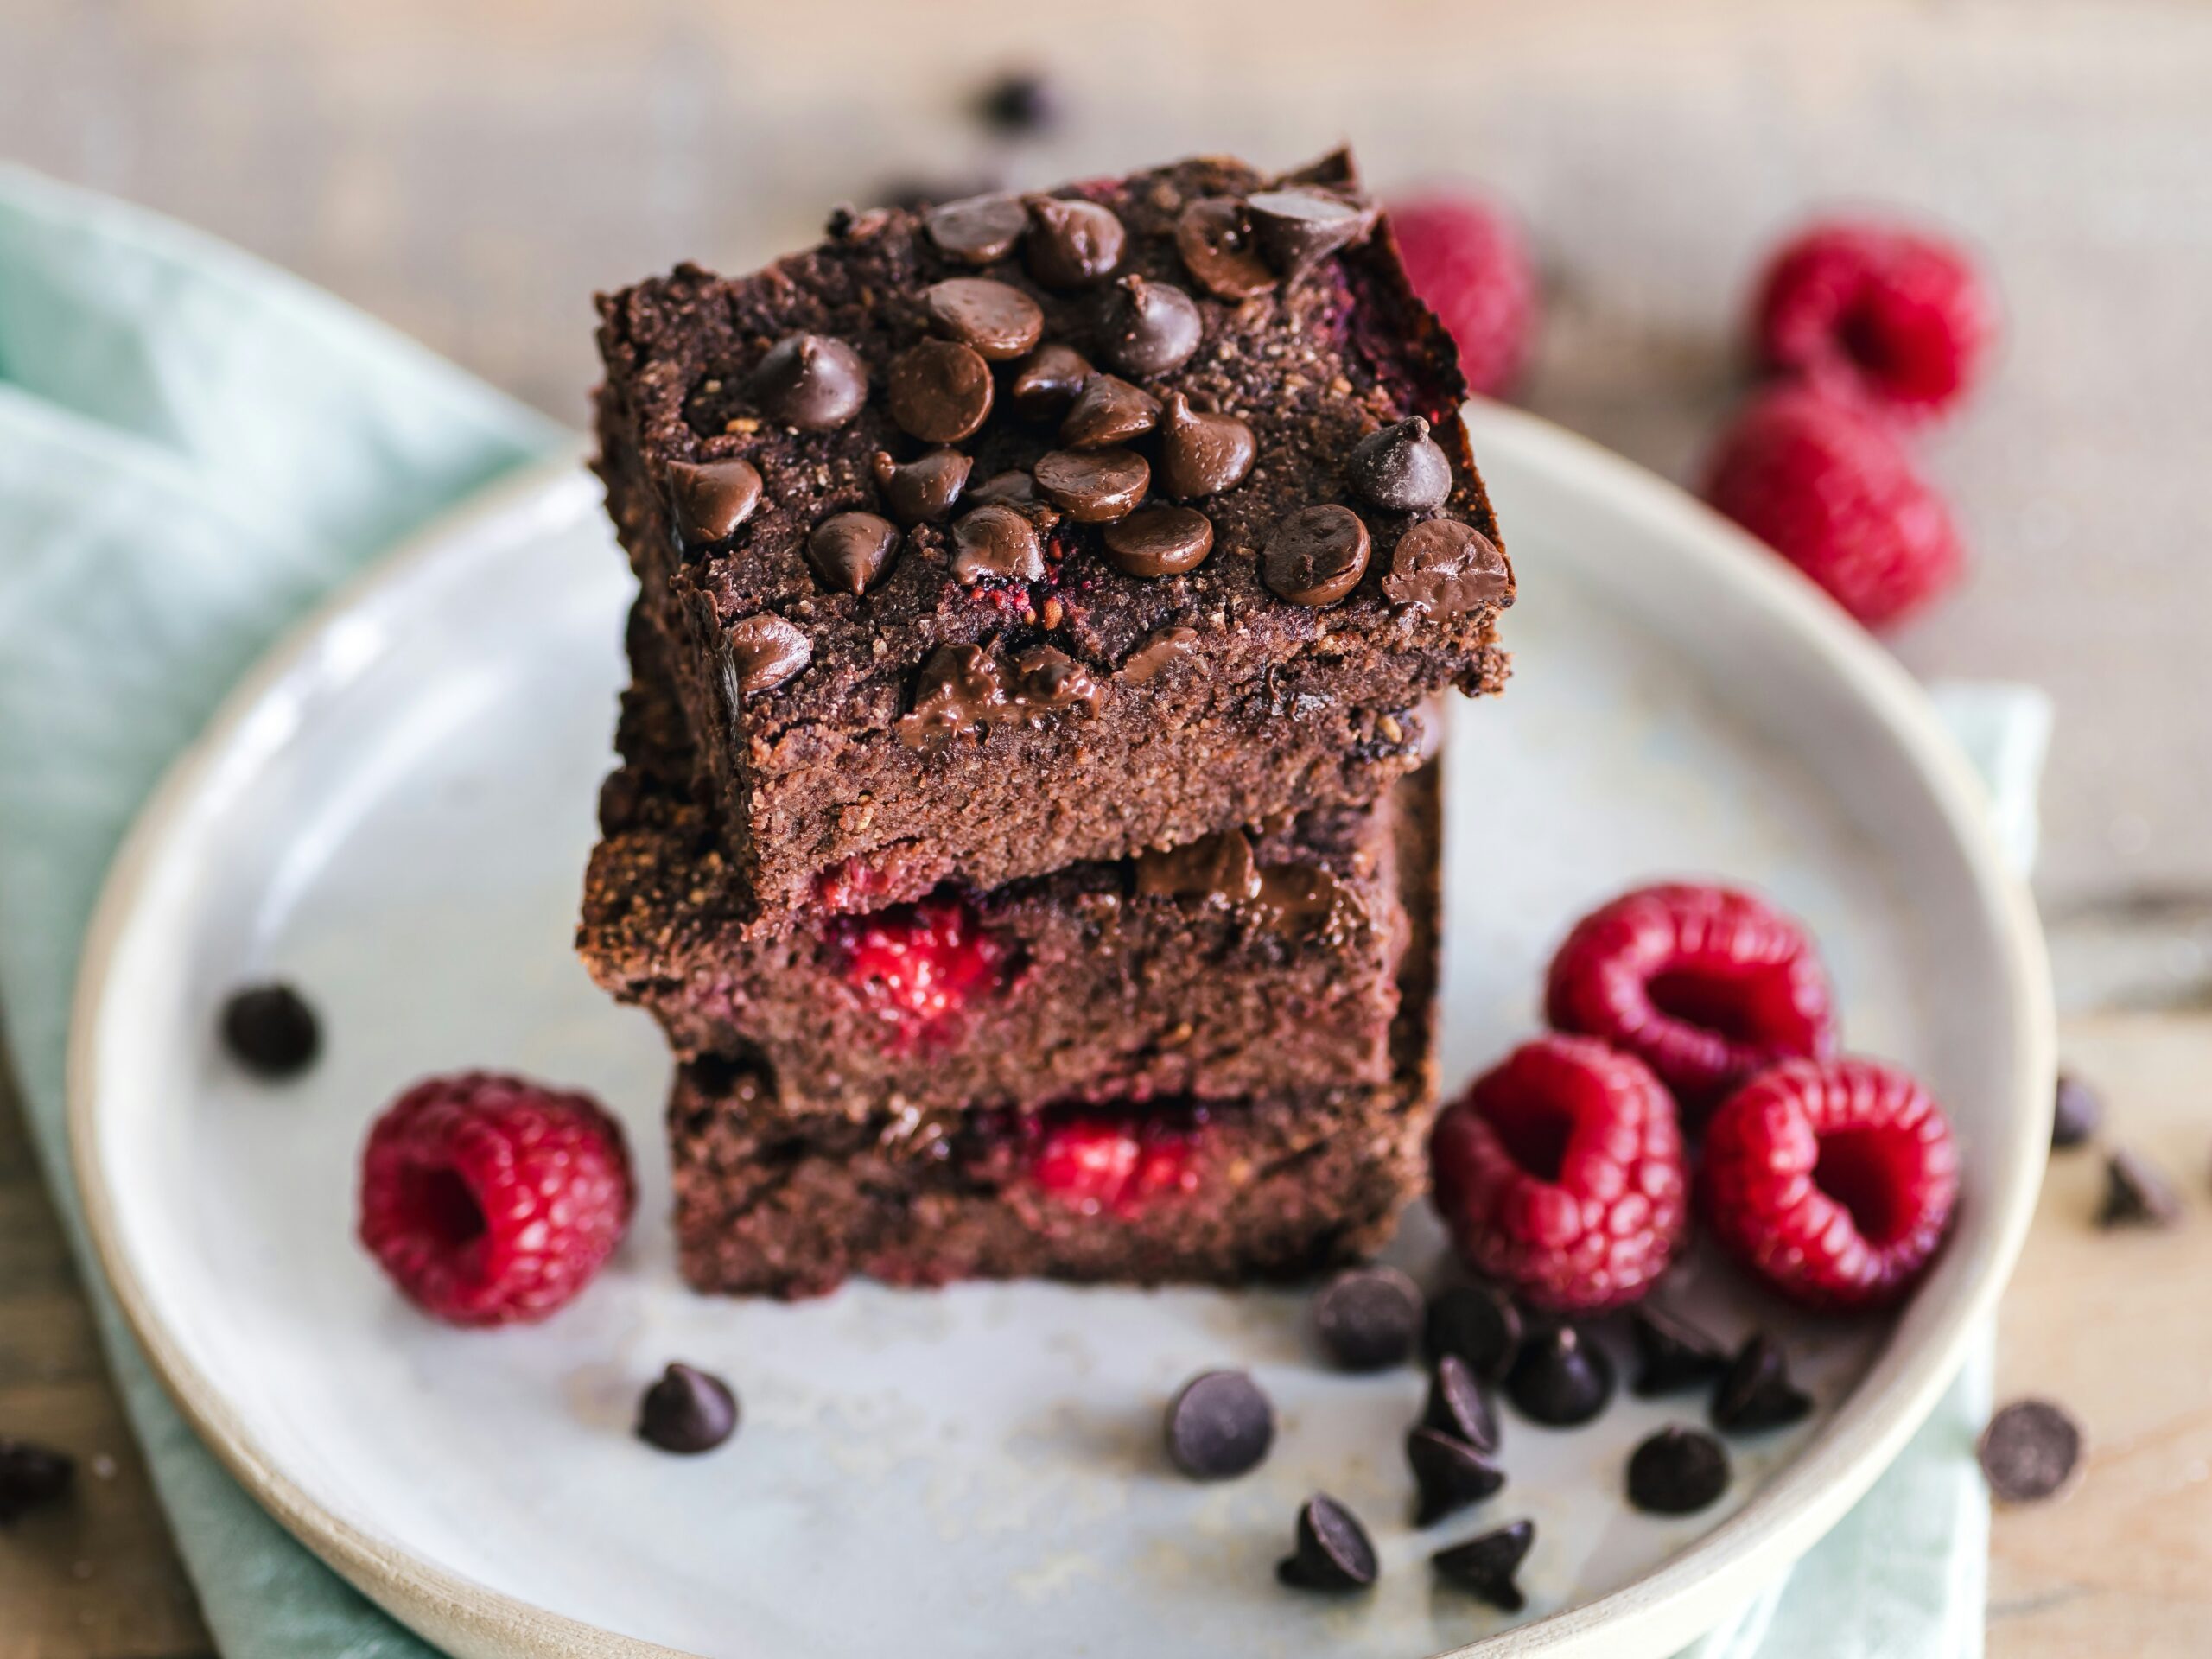 Three raspberry fudge brownies stacked on a white side plate with chocolate chips and fresh raspberries scattered around the plate.